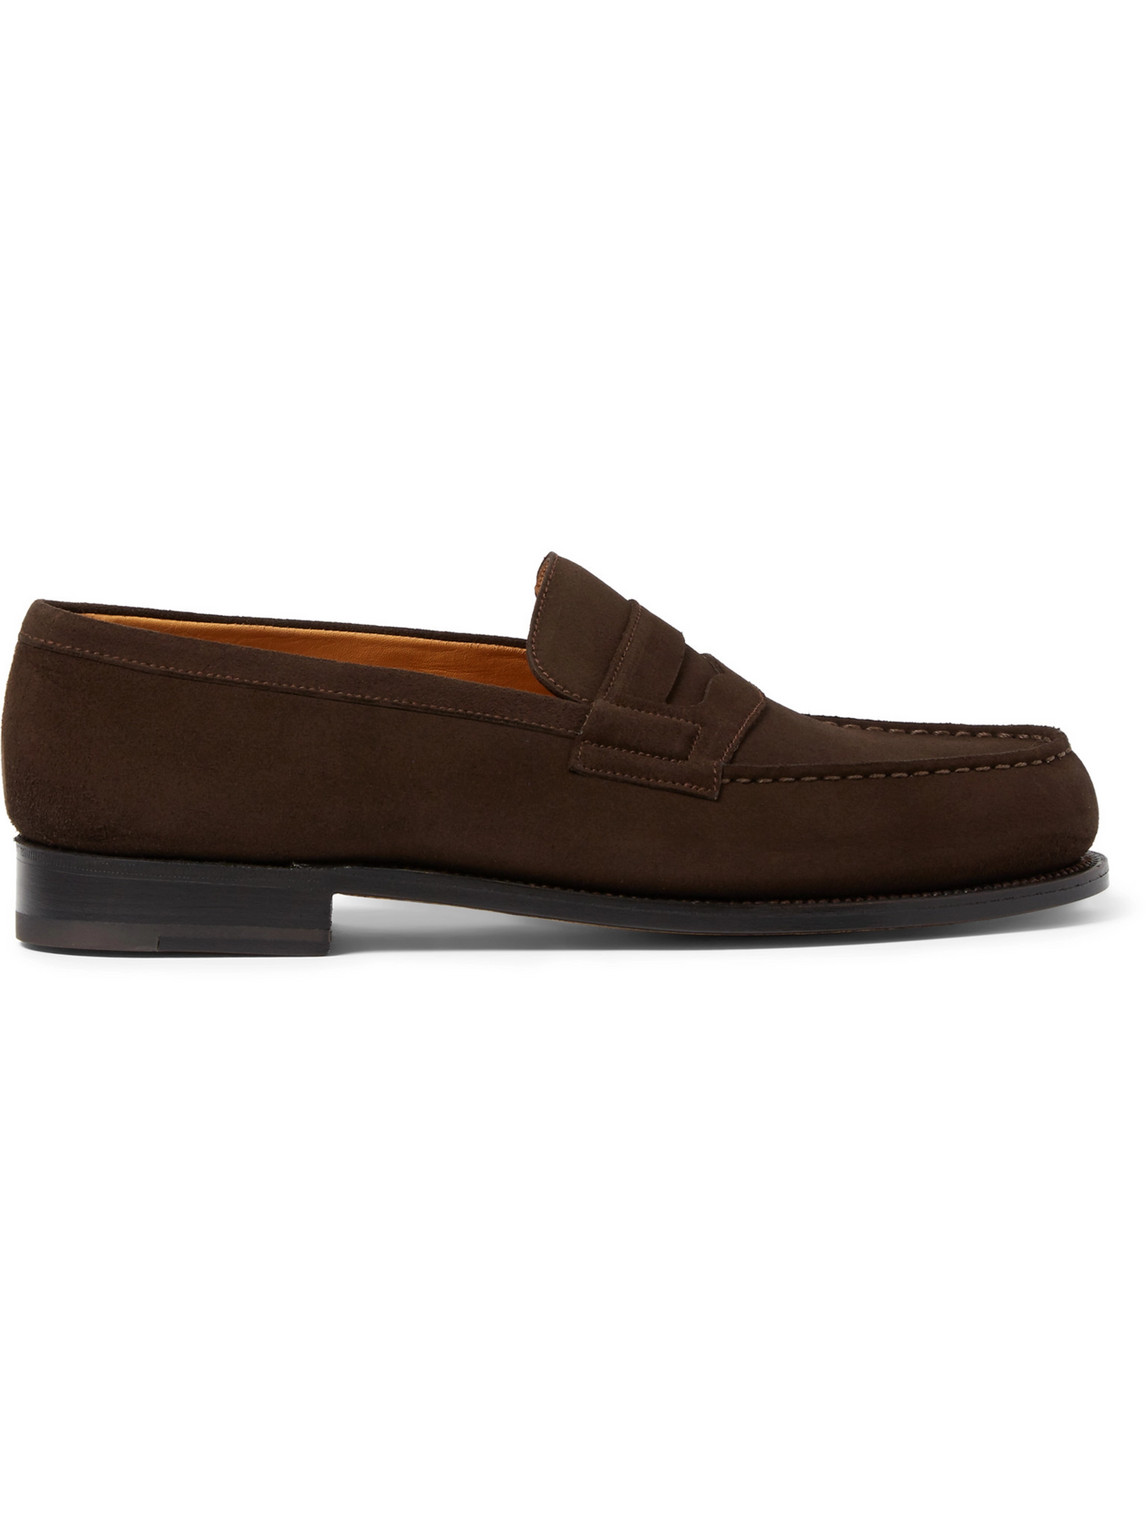 J.M. Weston 180 Moccasin Suede Loafers